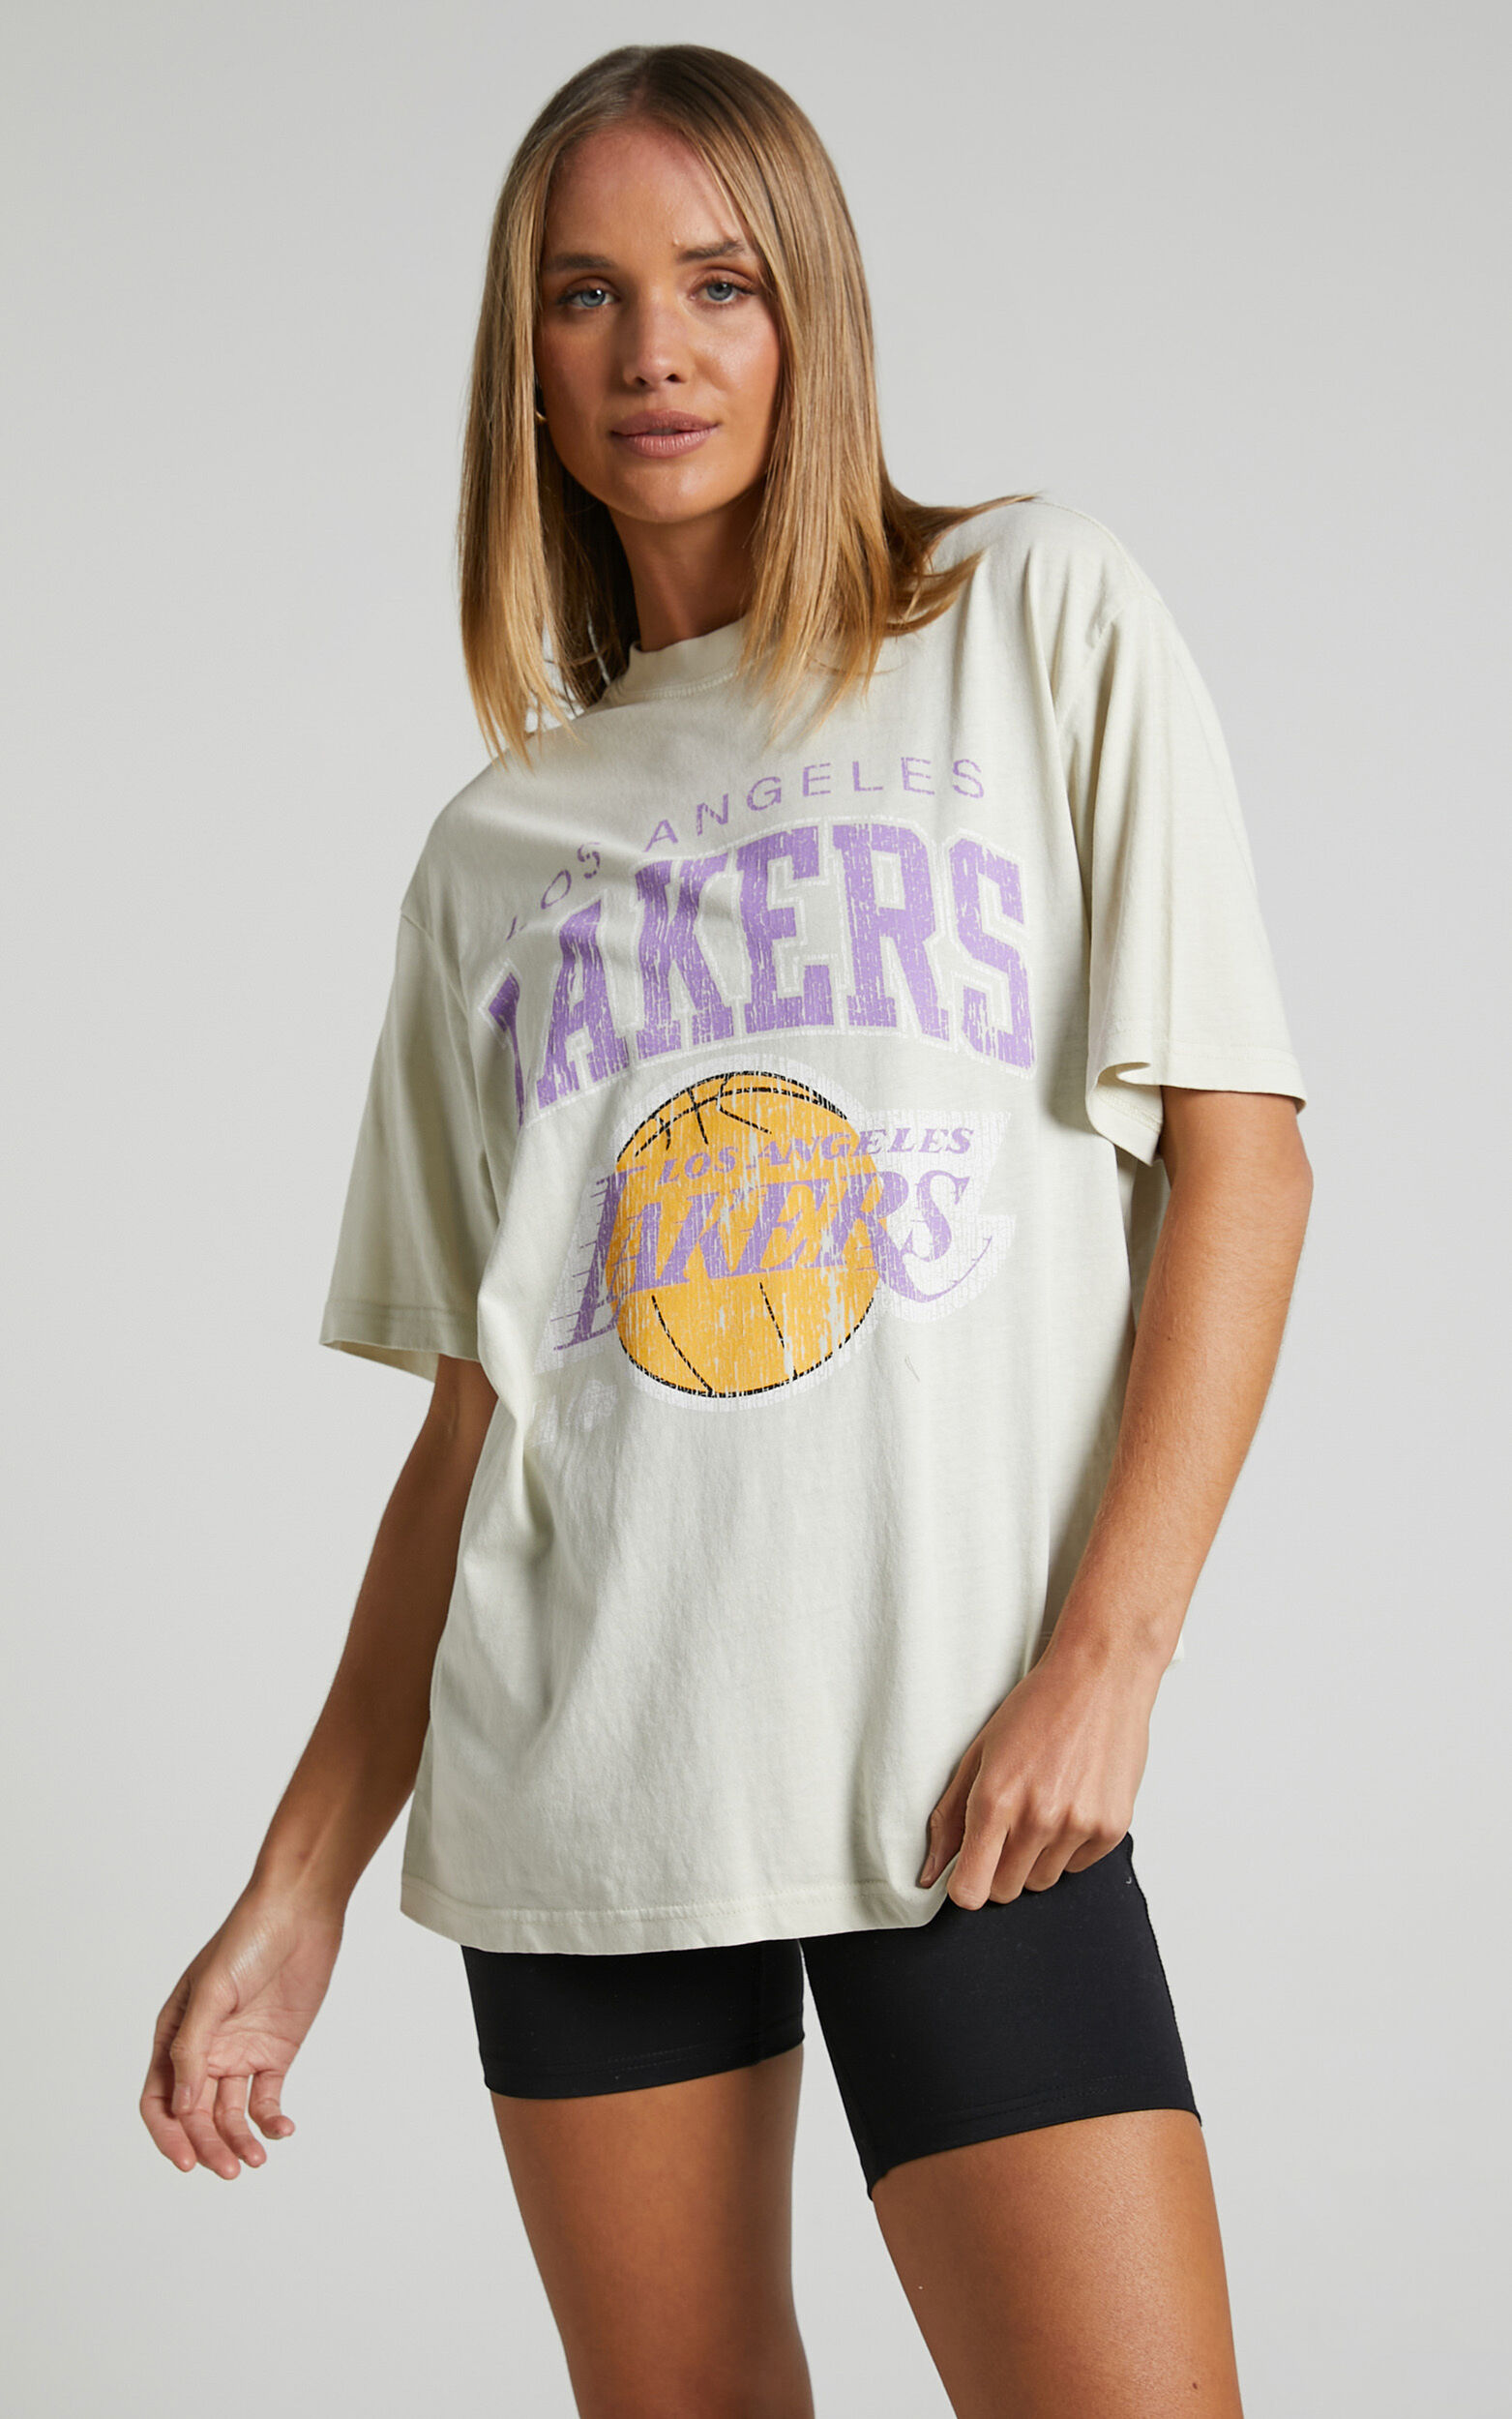 Mitchell & Ness Vintage Cracked Tee Los Angeles Lakers